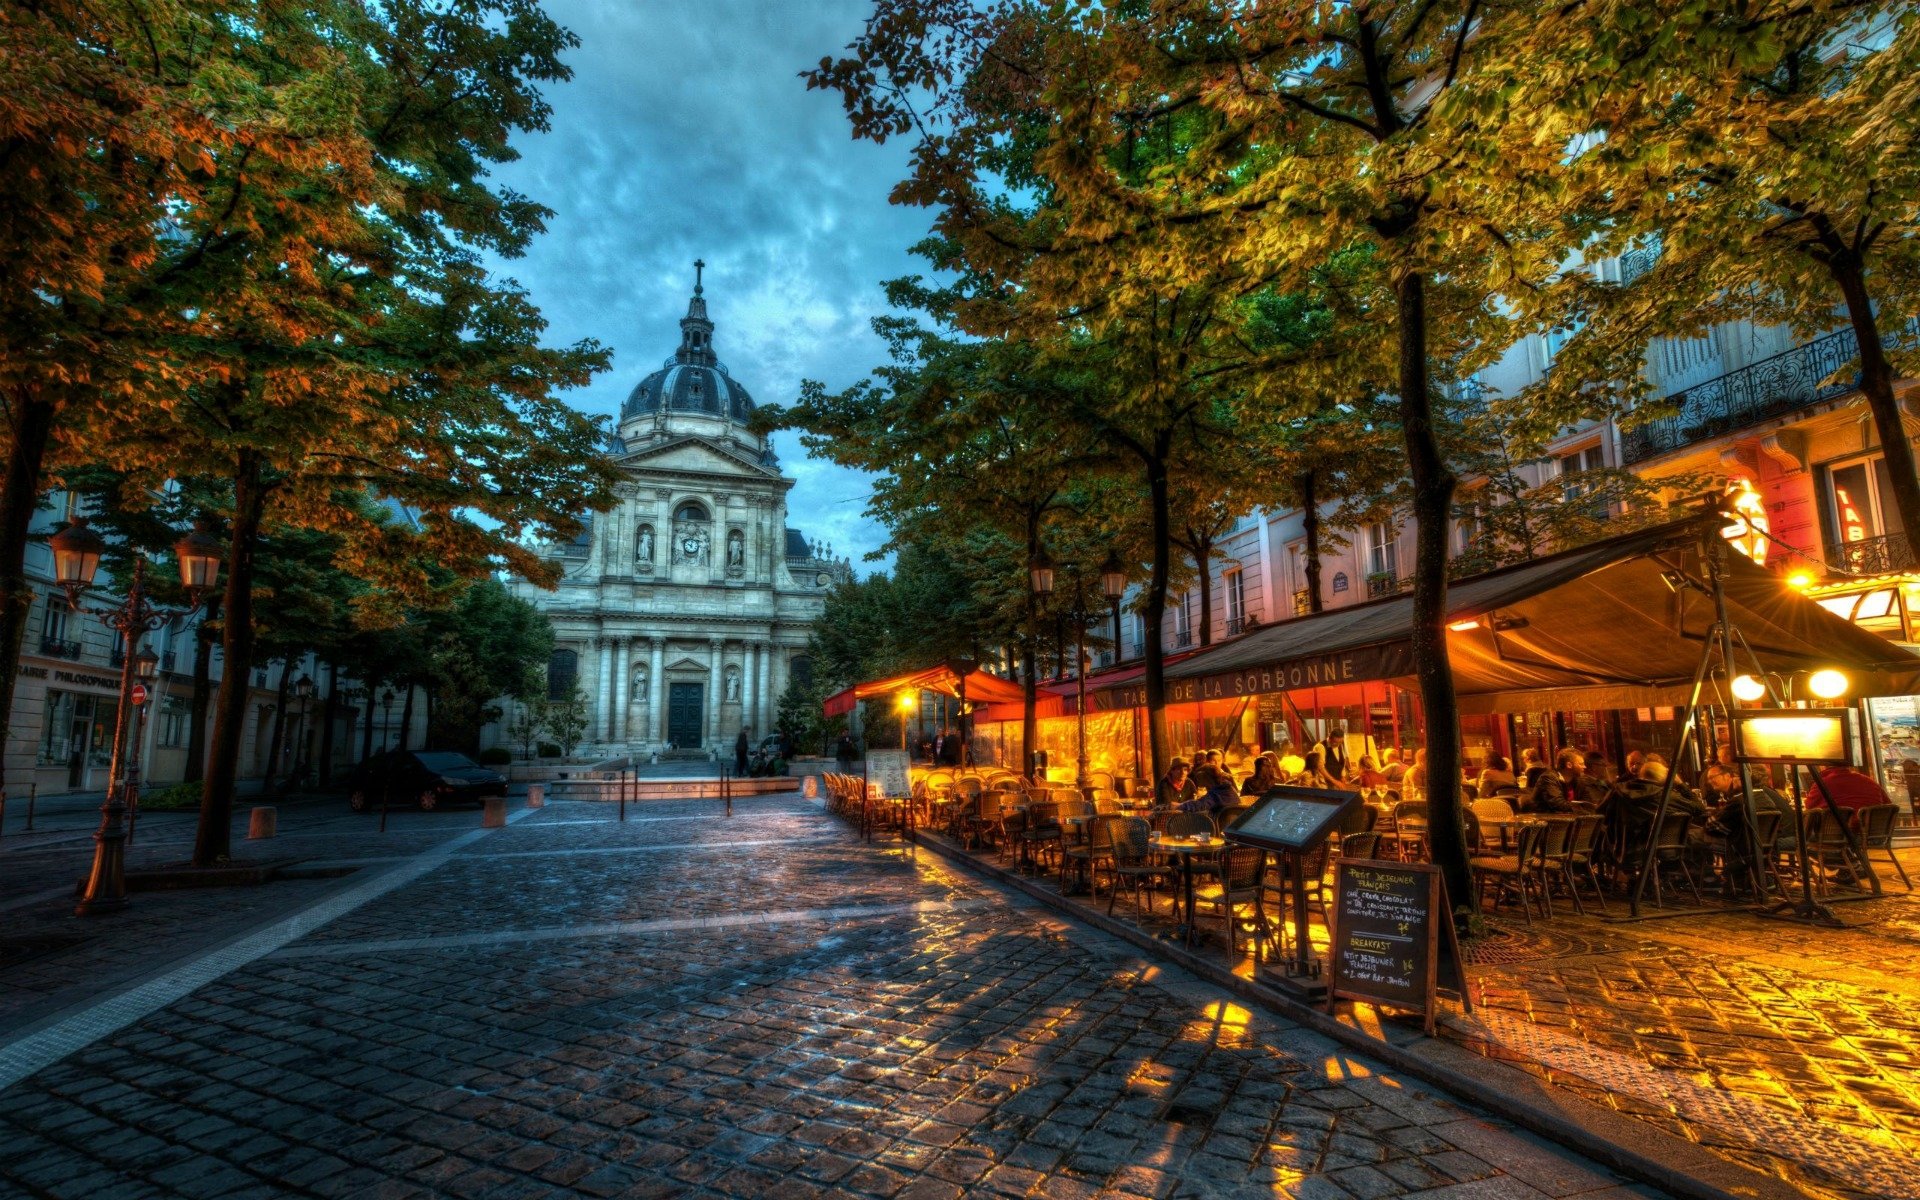 The Sorbonne HD Wallpaper Background Image